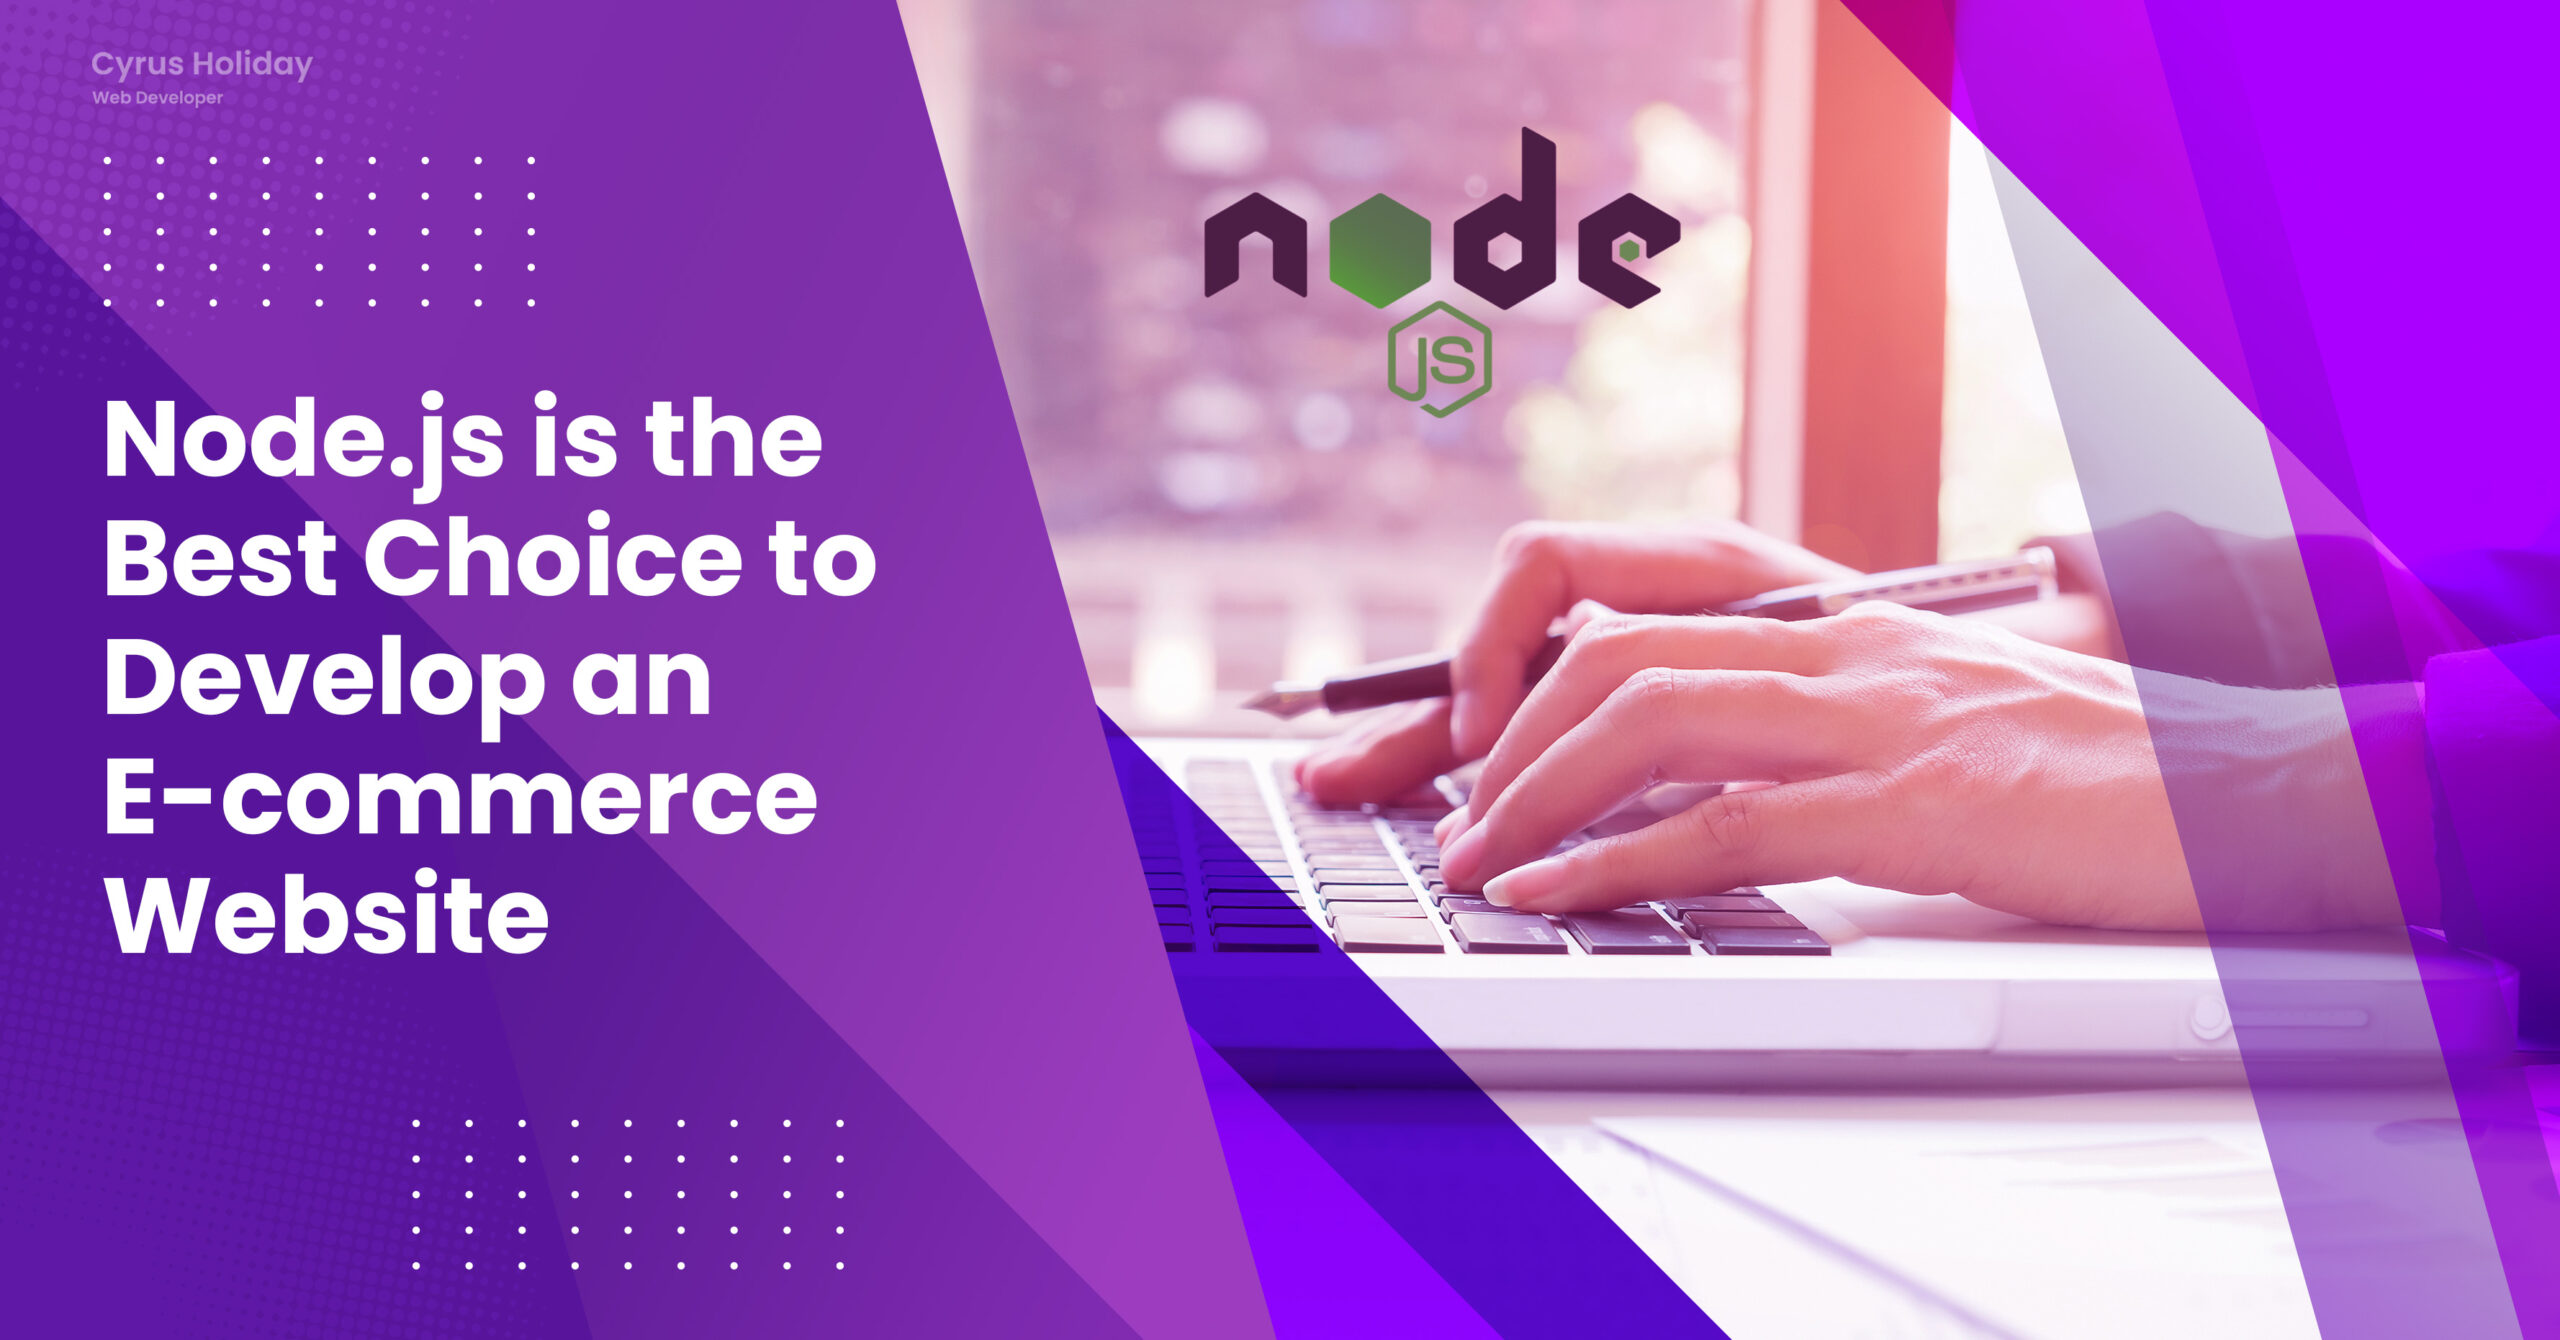 10-Reasons-Why-Node.js-is-the-Best-Choice-to-Develop-an-E-commerce